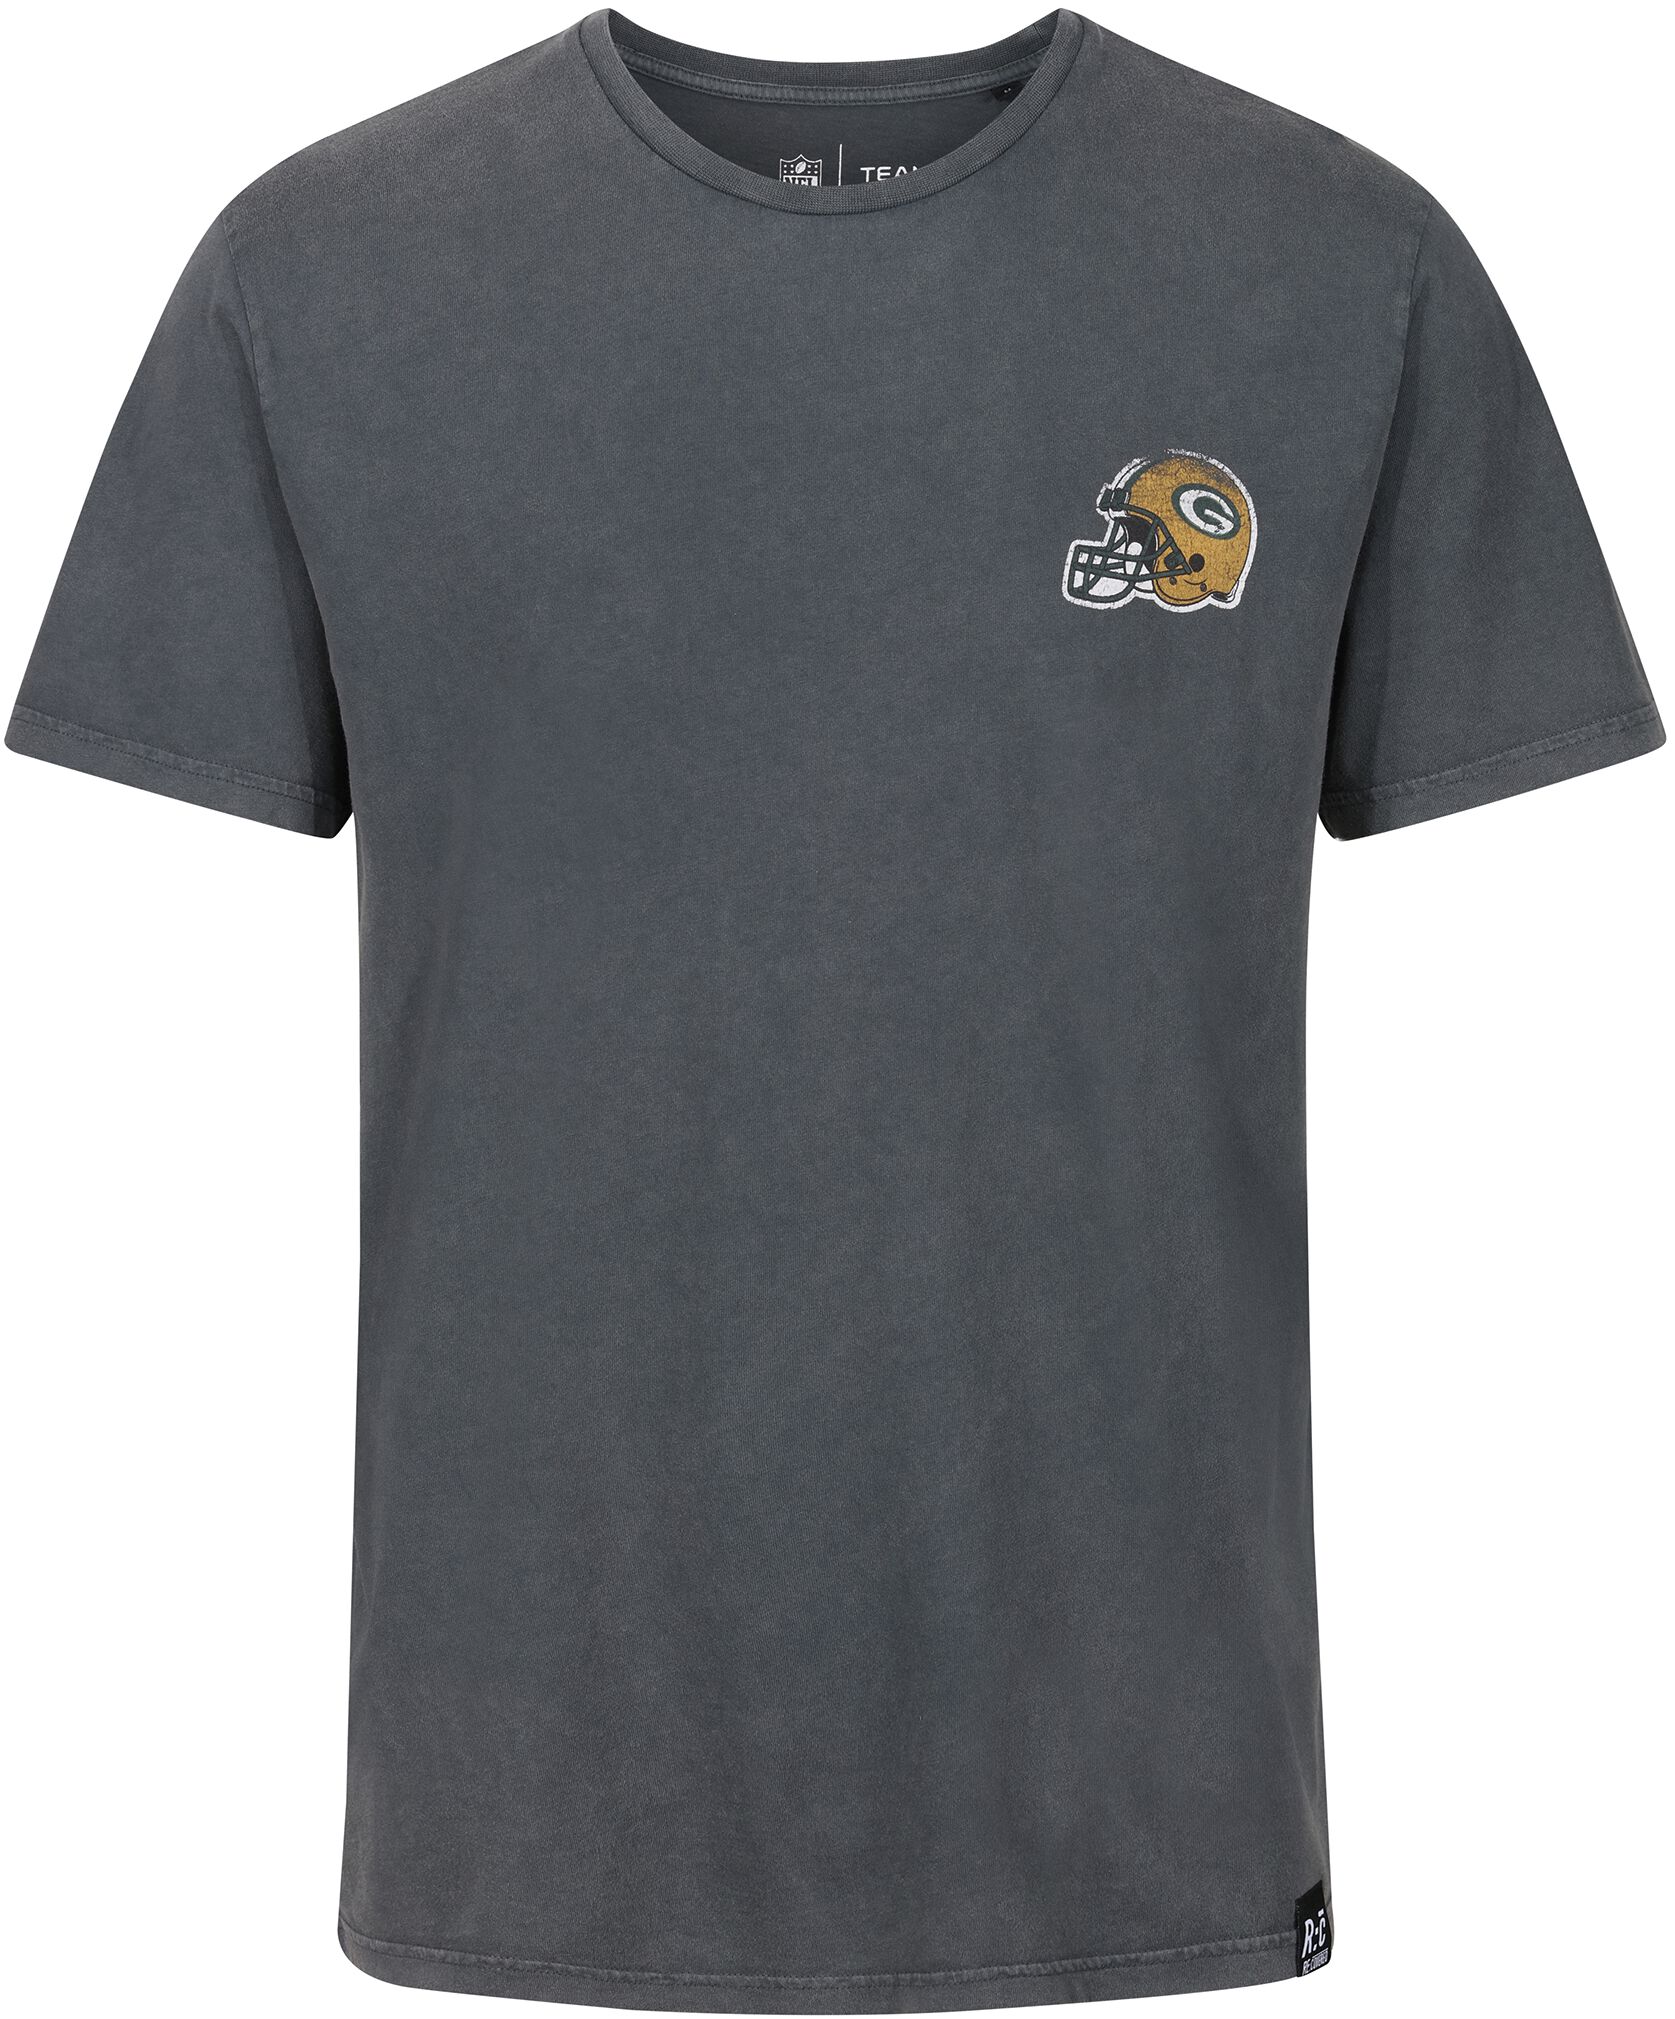 NFL NFL PACKERS COLLEGE BLACK WASHED T-Shirt multicolor in M